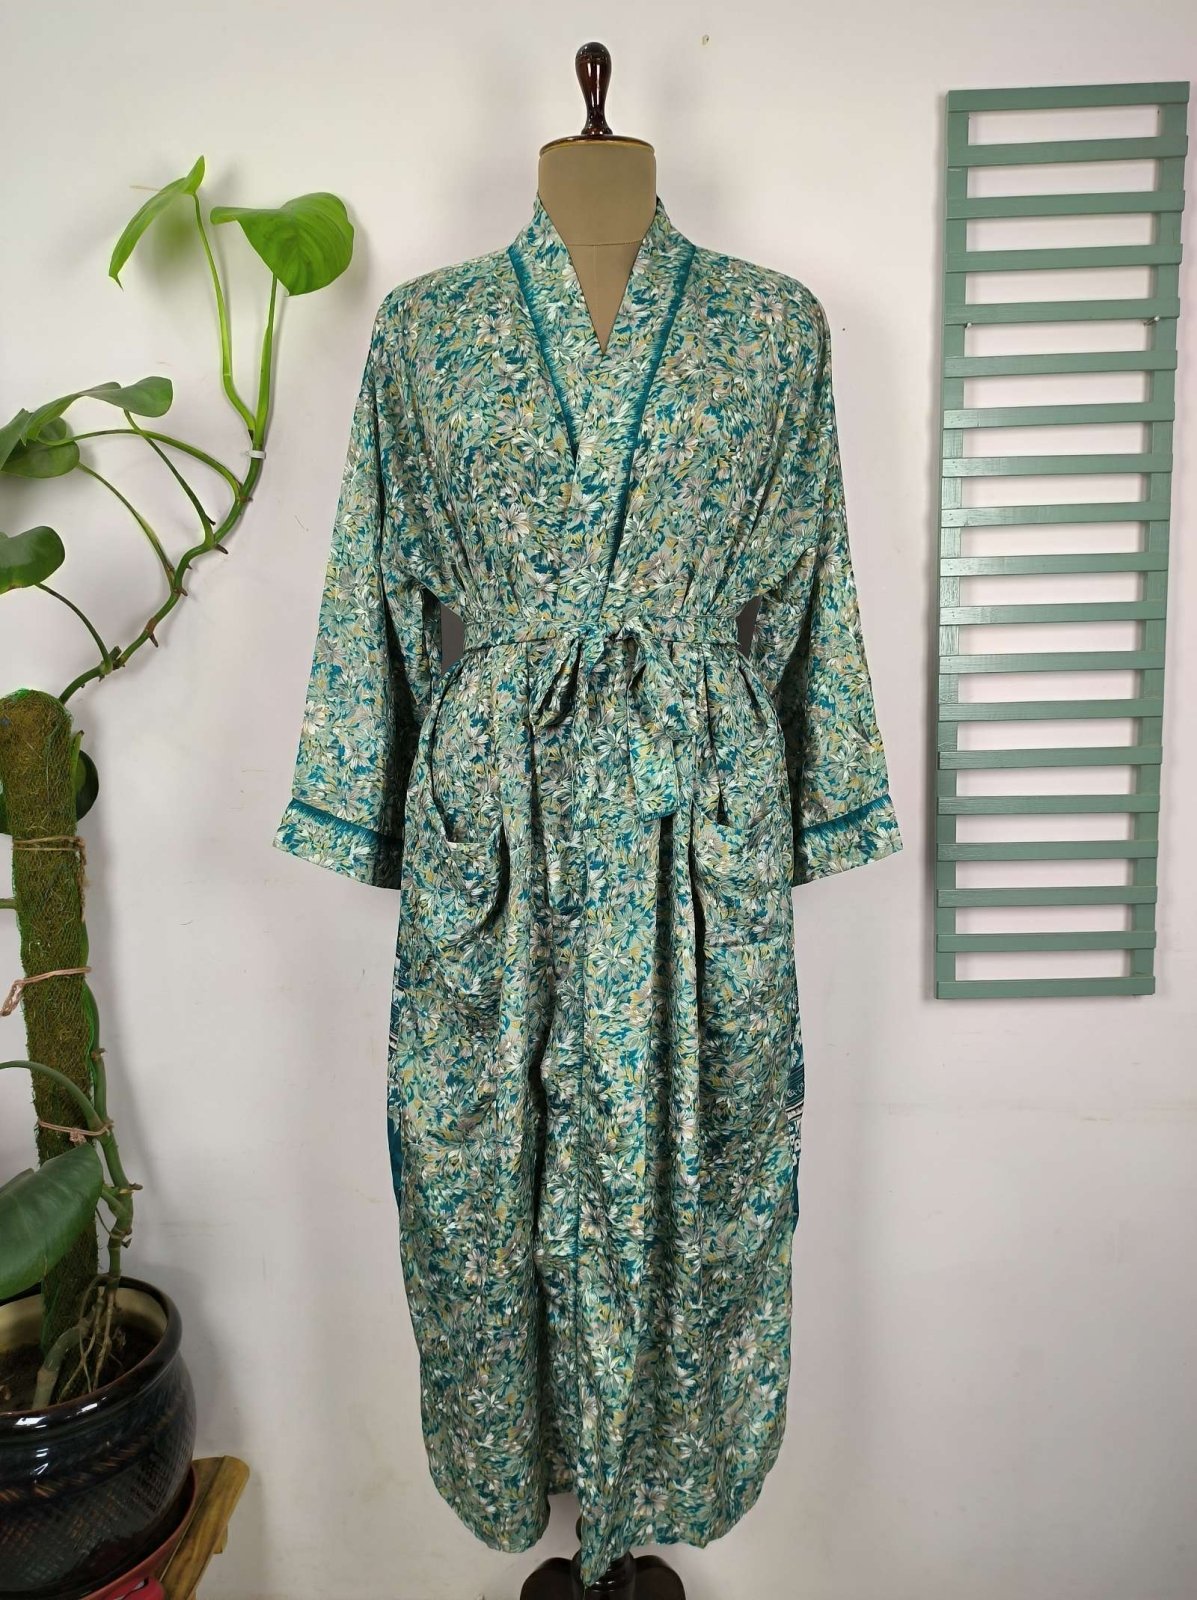 Upcycle Boho Chic Coverup Recycle Silk Sari Kimono Gorgeous Wardrobe Vintage Elegance House Robe | Duster Cardigan | Teal White Hues Floral - The Eastern Loom